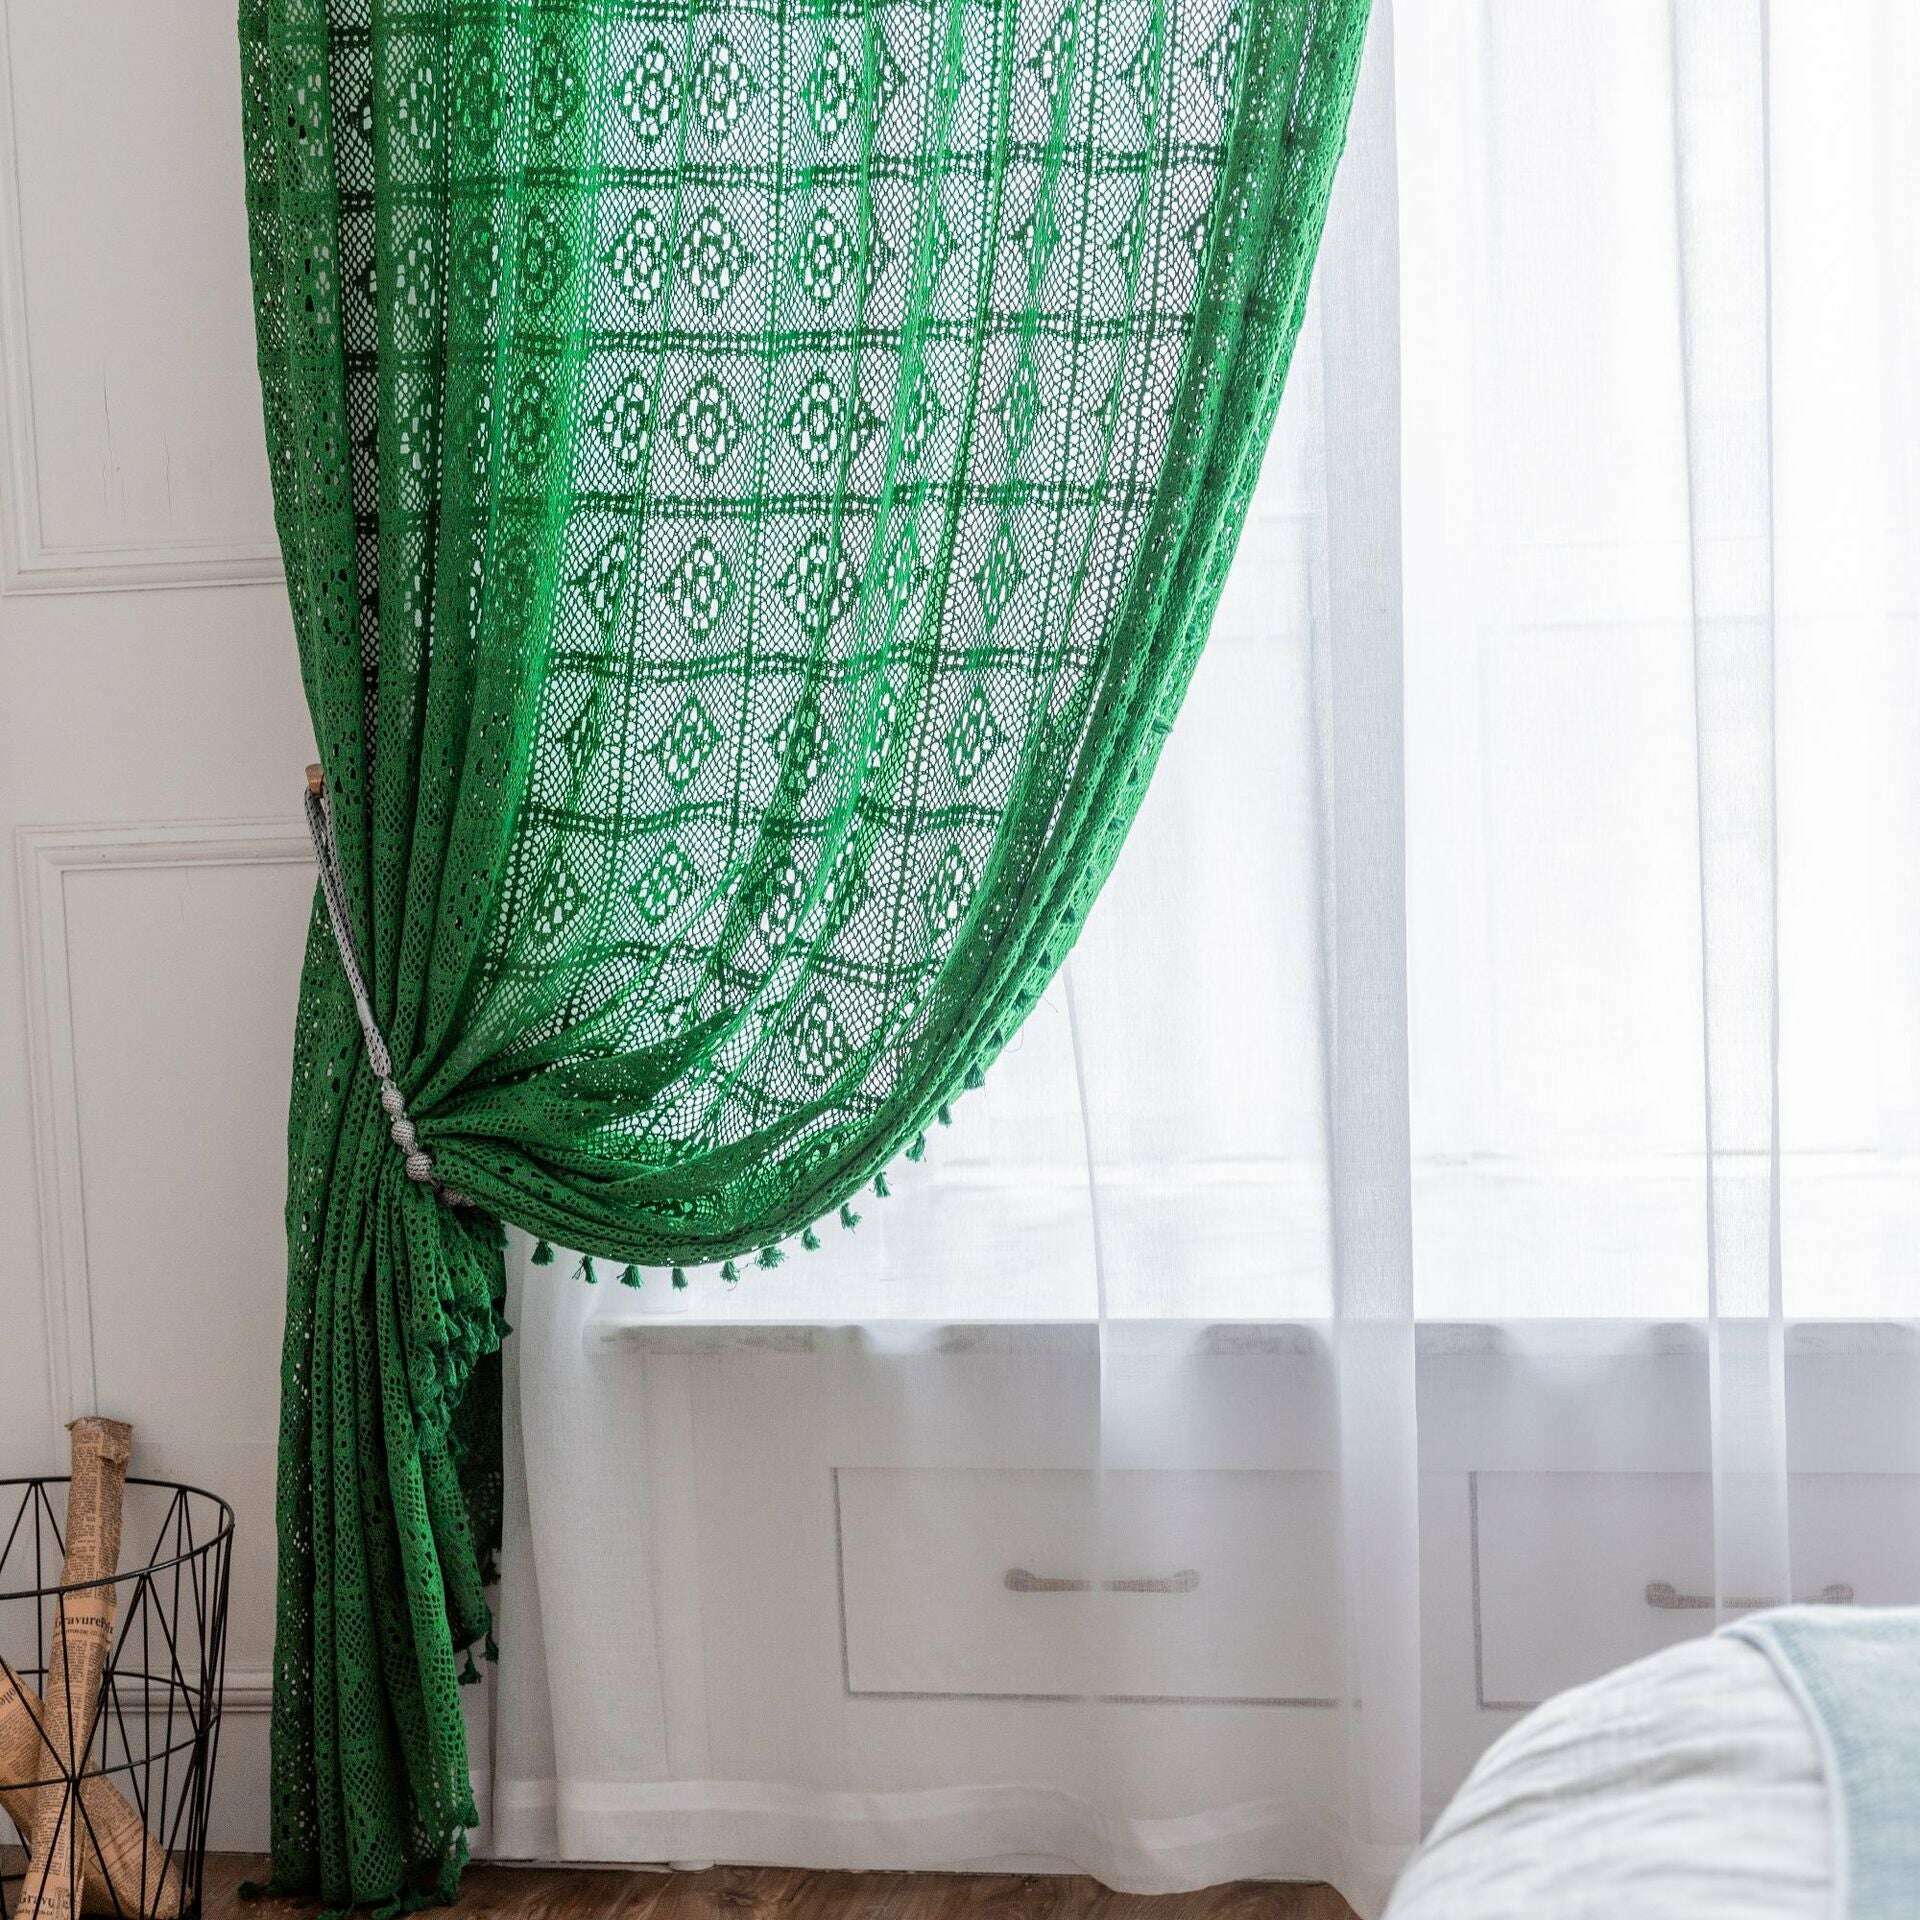 Rémy Crochet Sheer Curtains - Green / Pink,Sheer Curtains,Discover Curtains